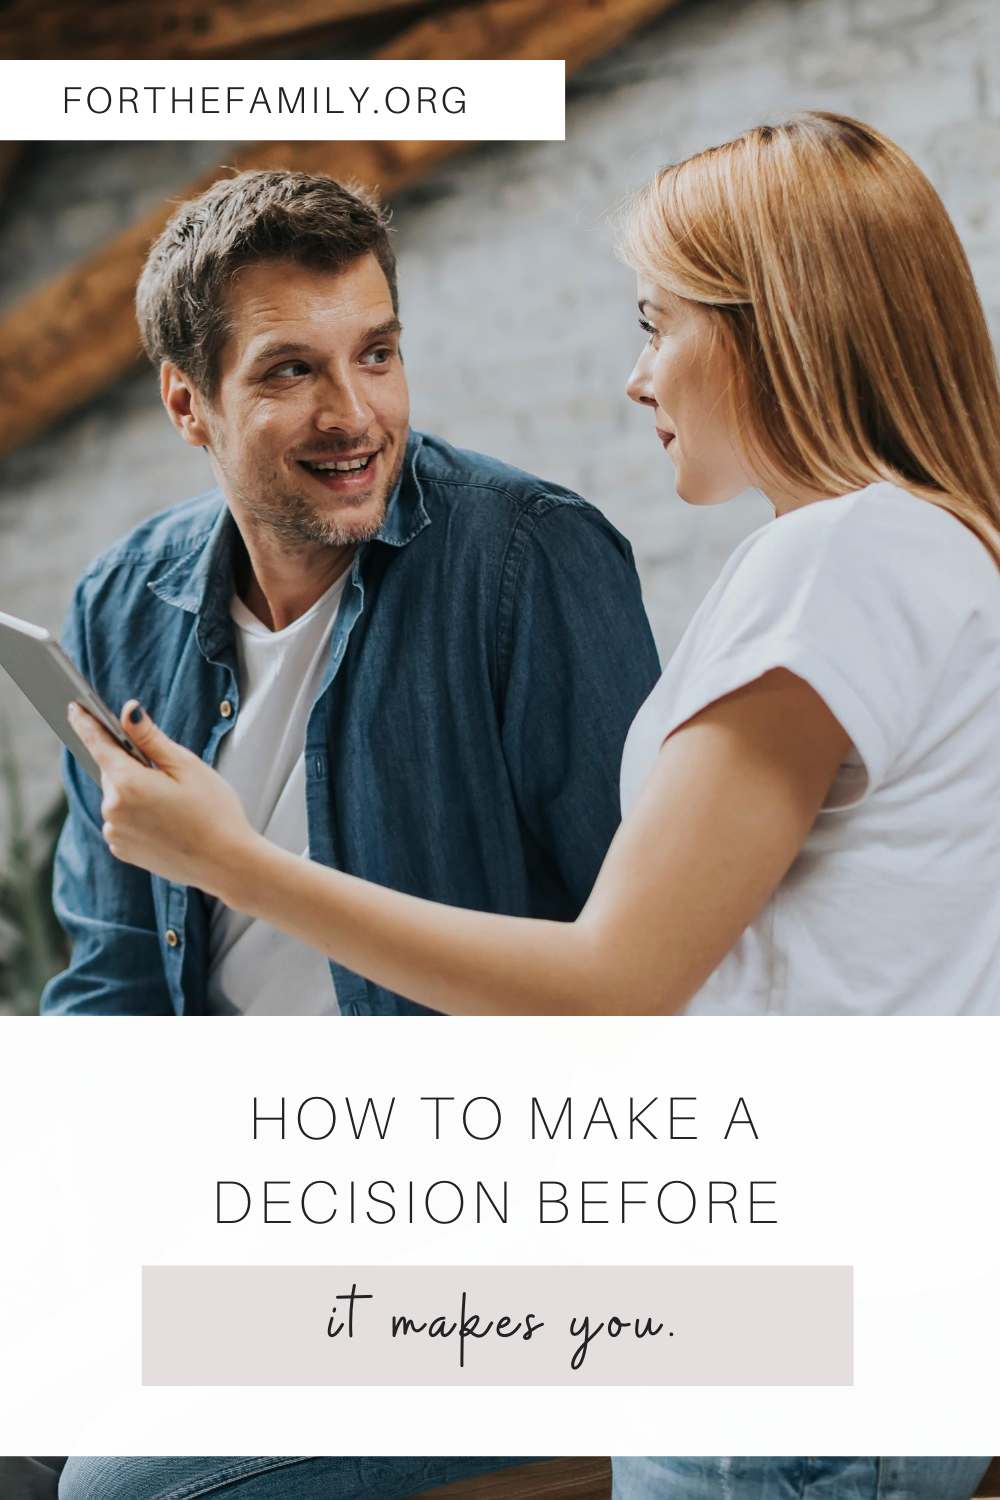 How to Make a Decision Before it Makes You